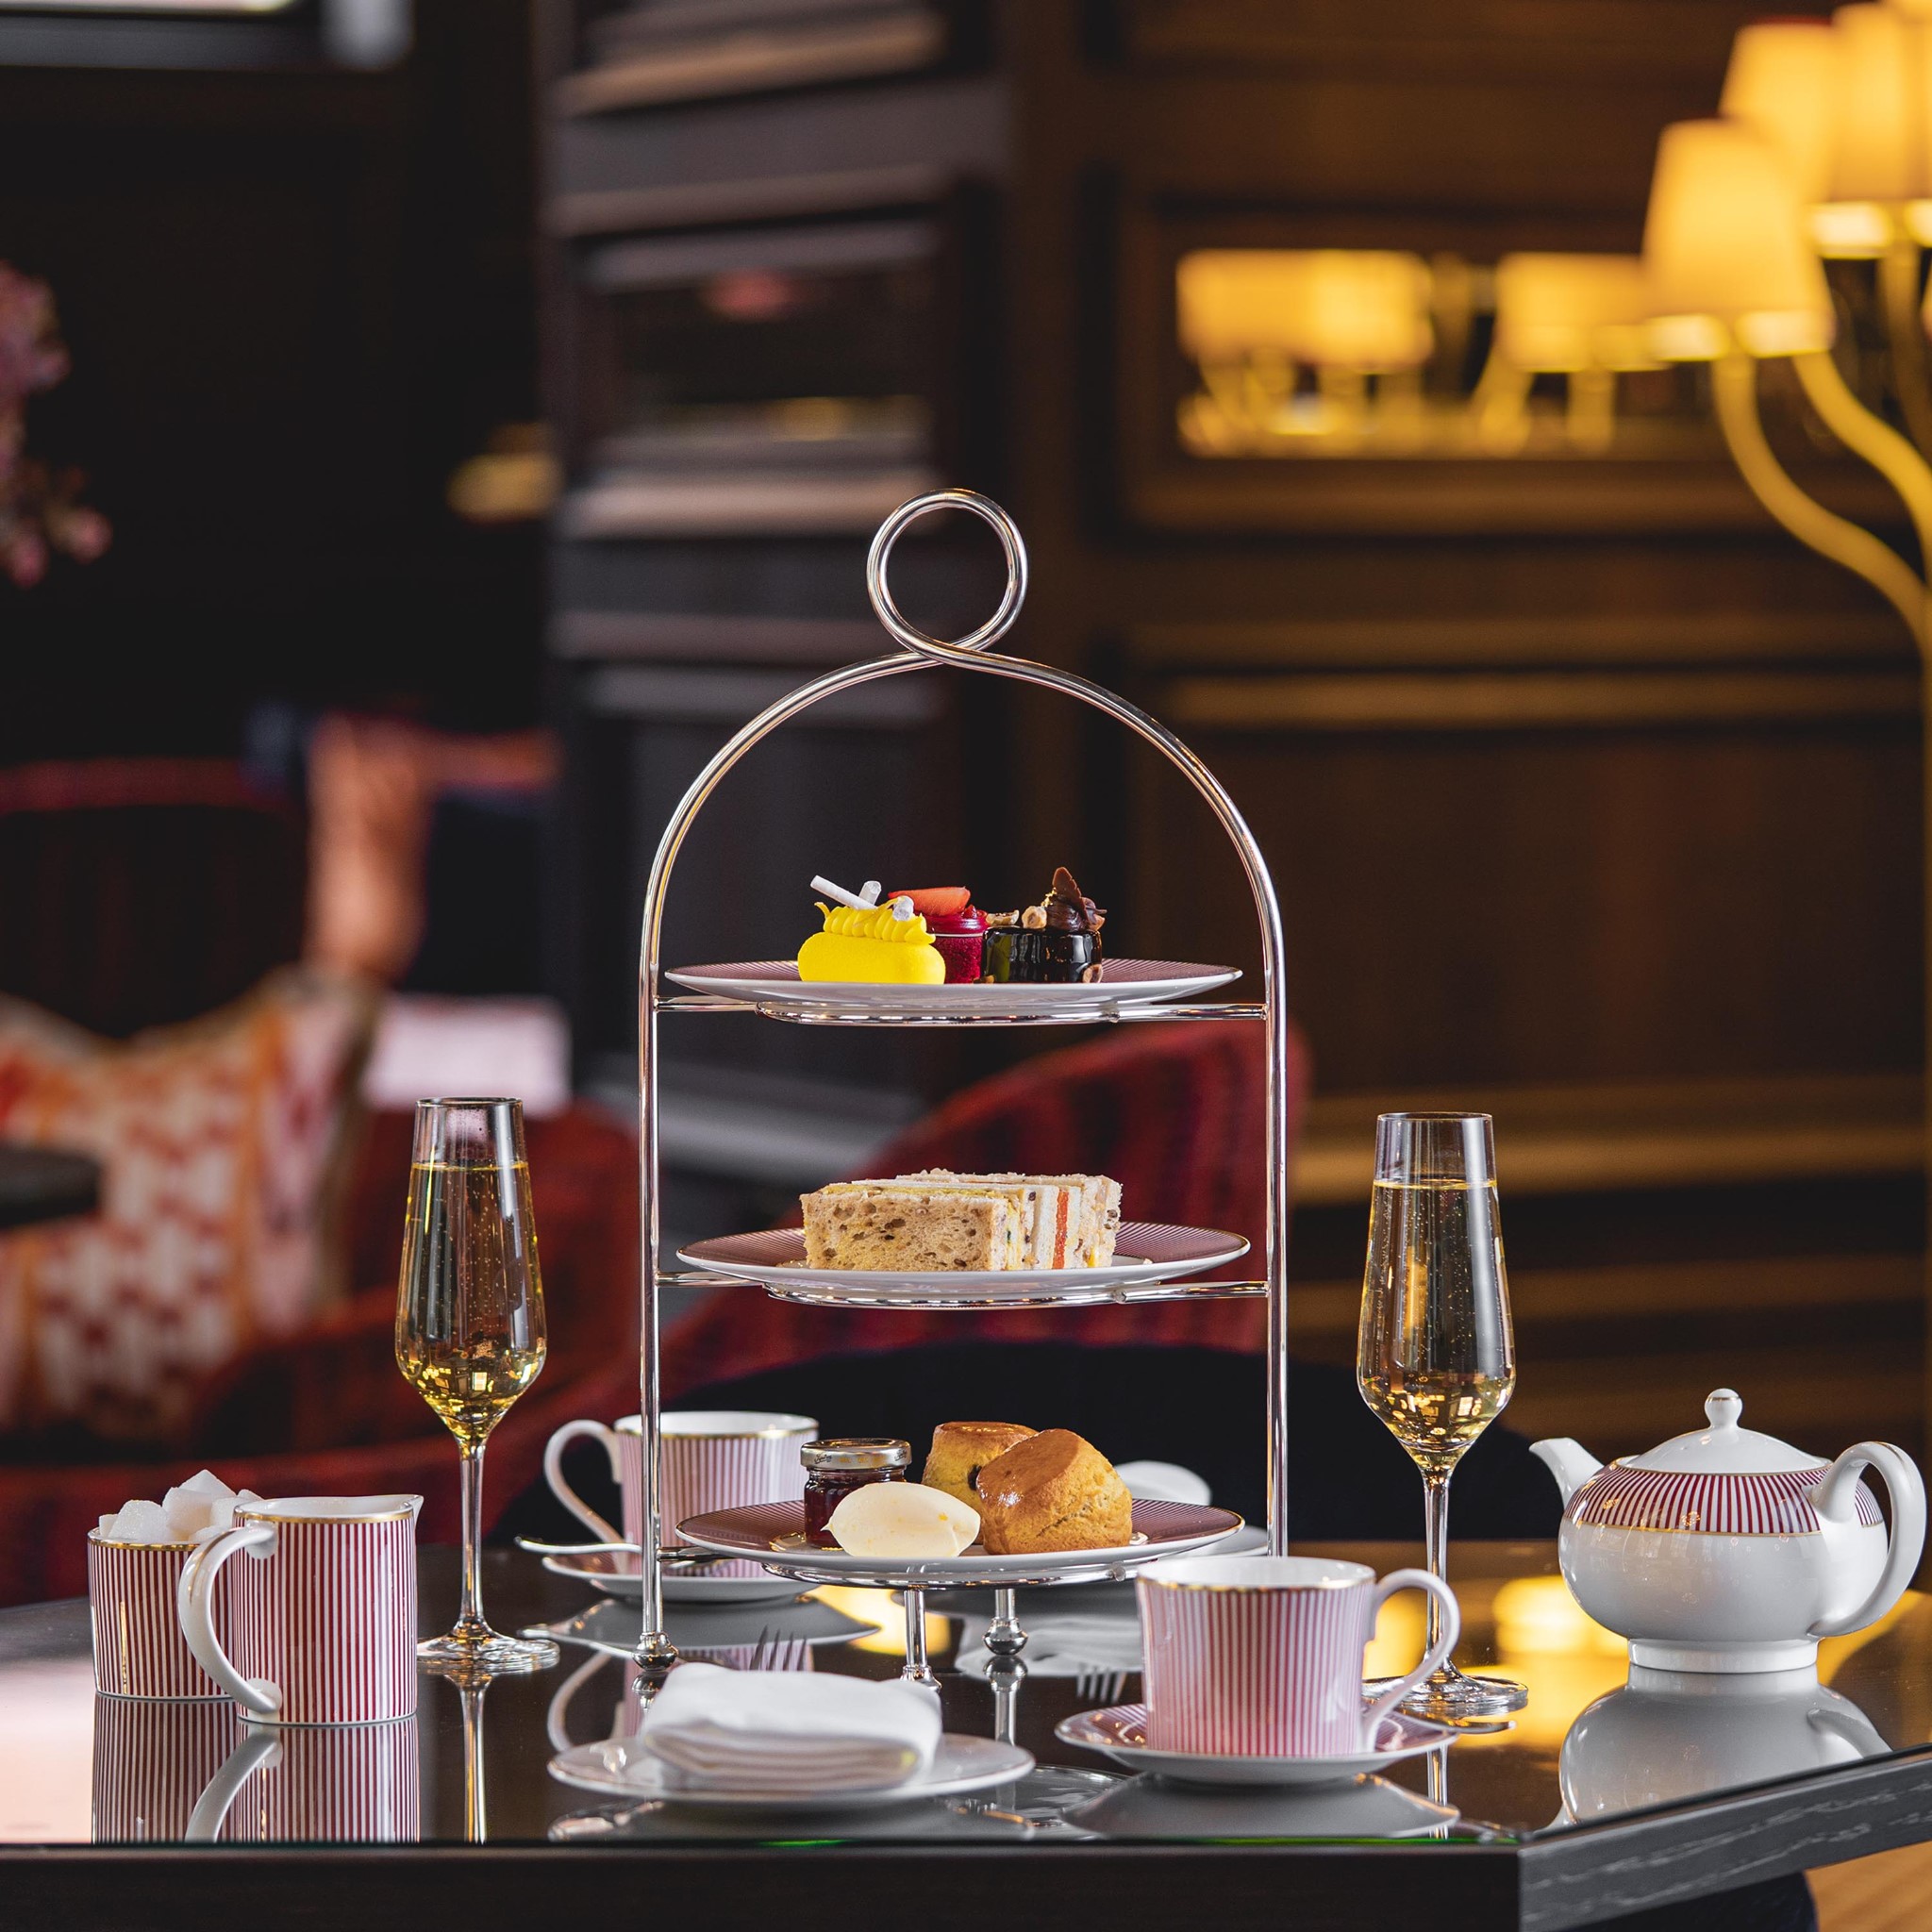 Afternoon Tea is served in Madeleine every Wednesday to Sunday, from 1pm to 5pm